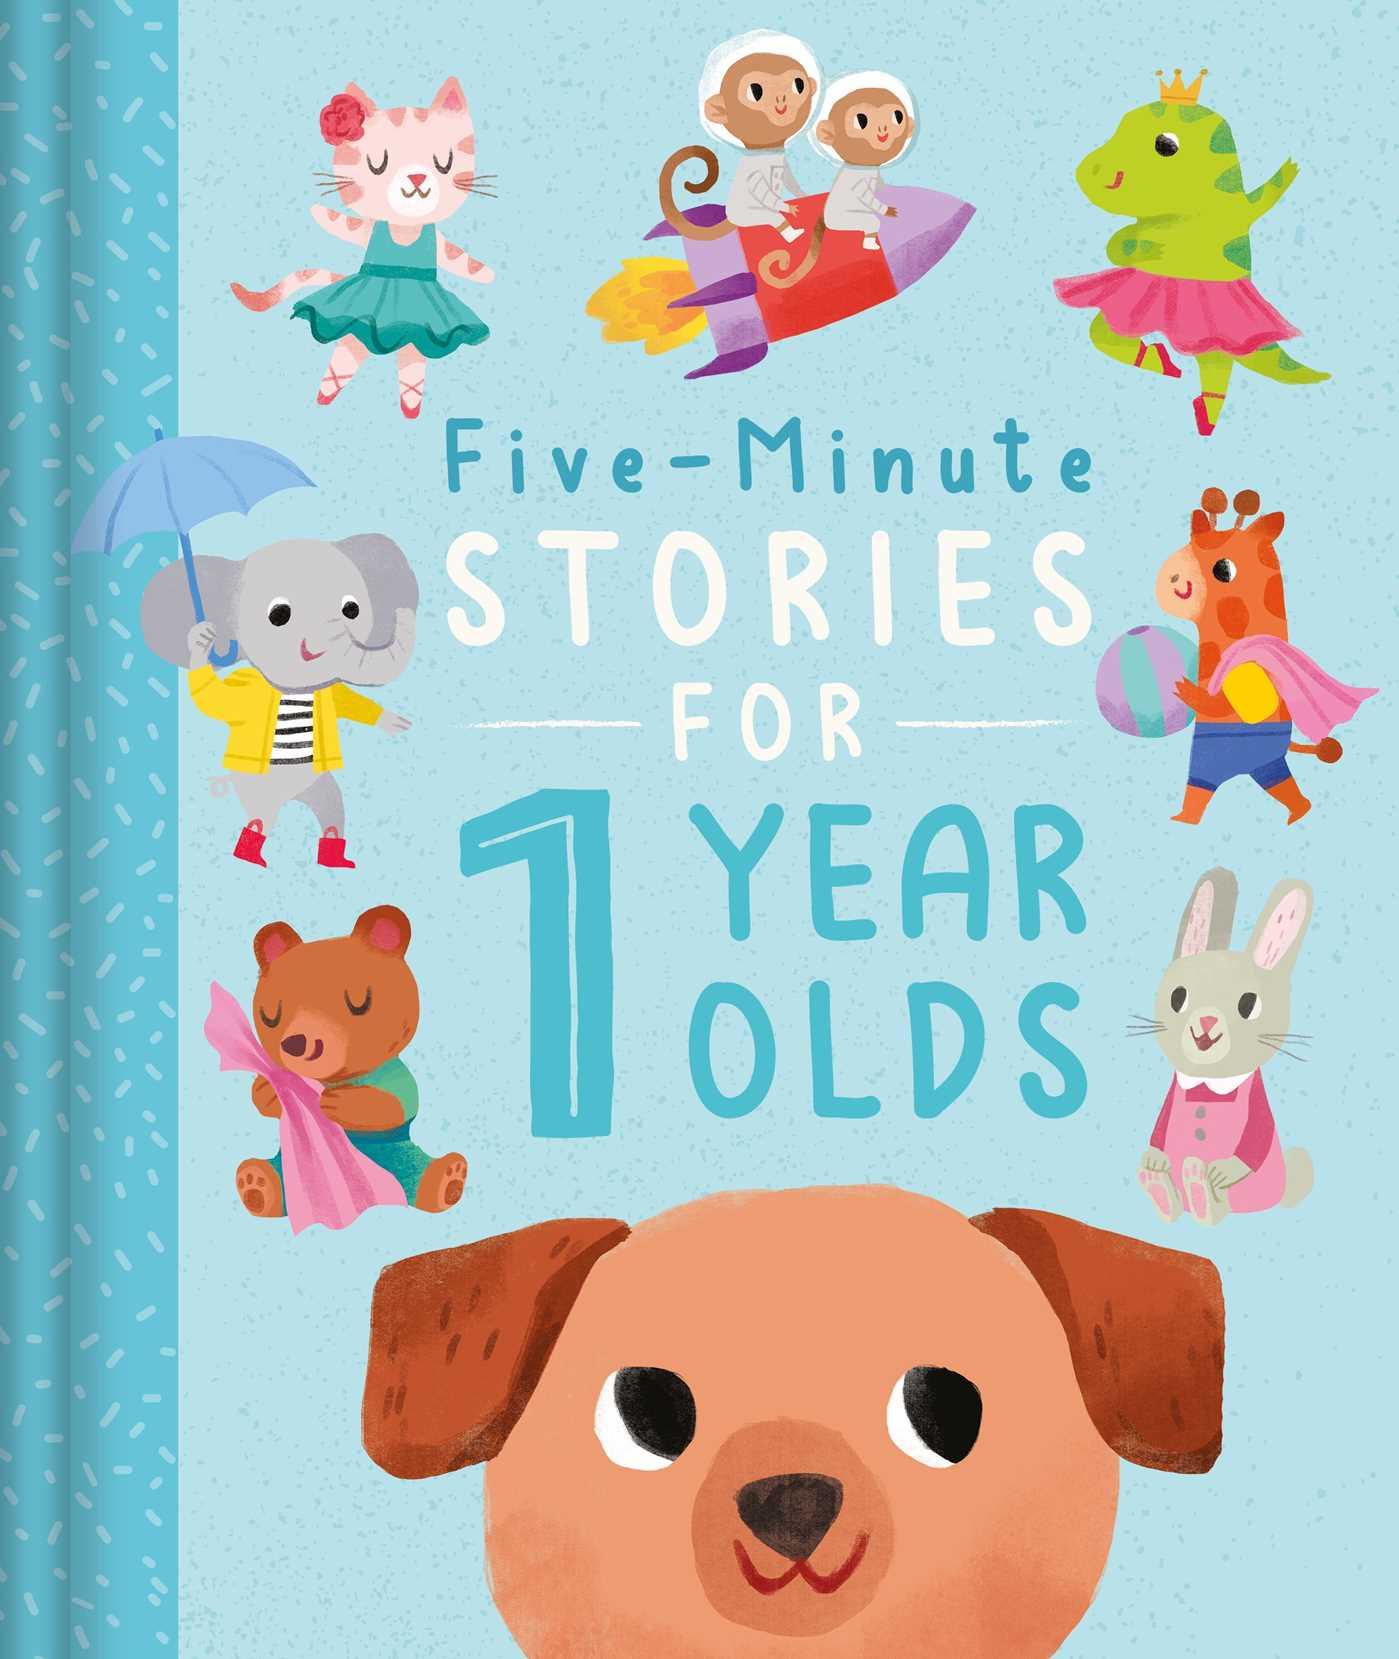 Knjiga Five-Minute Stories for 1 Year Olds: With 7 Stories, 1 for Every Day of the Week Kathryn Selbert